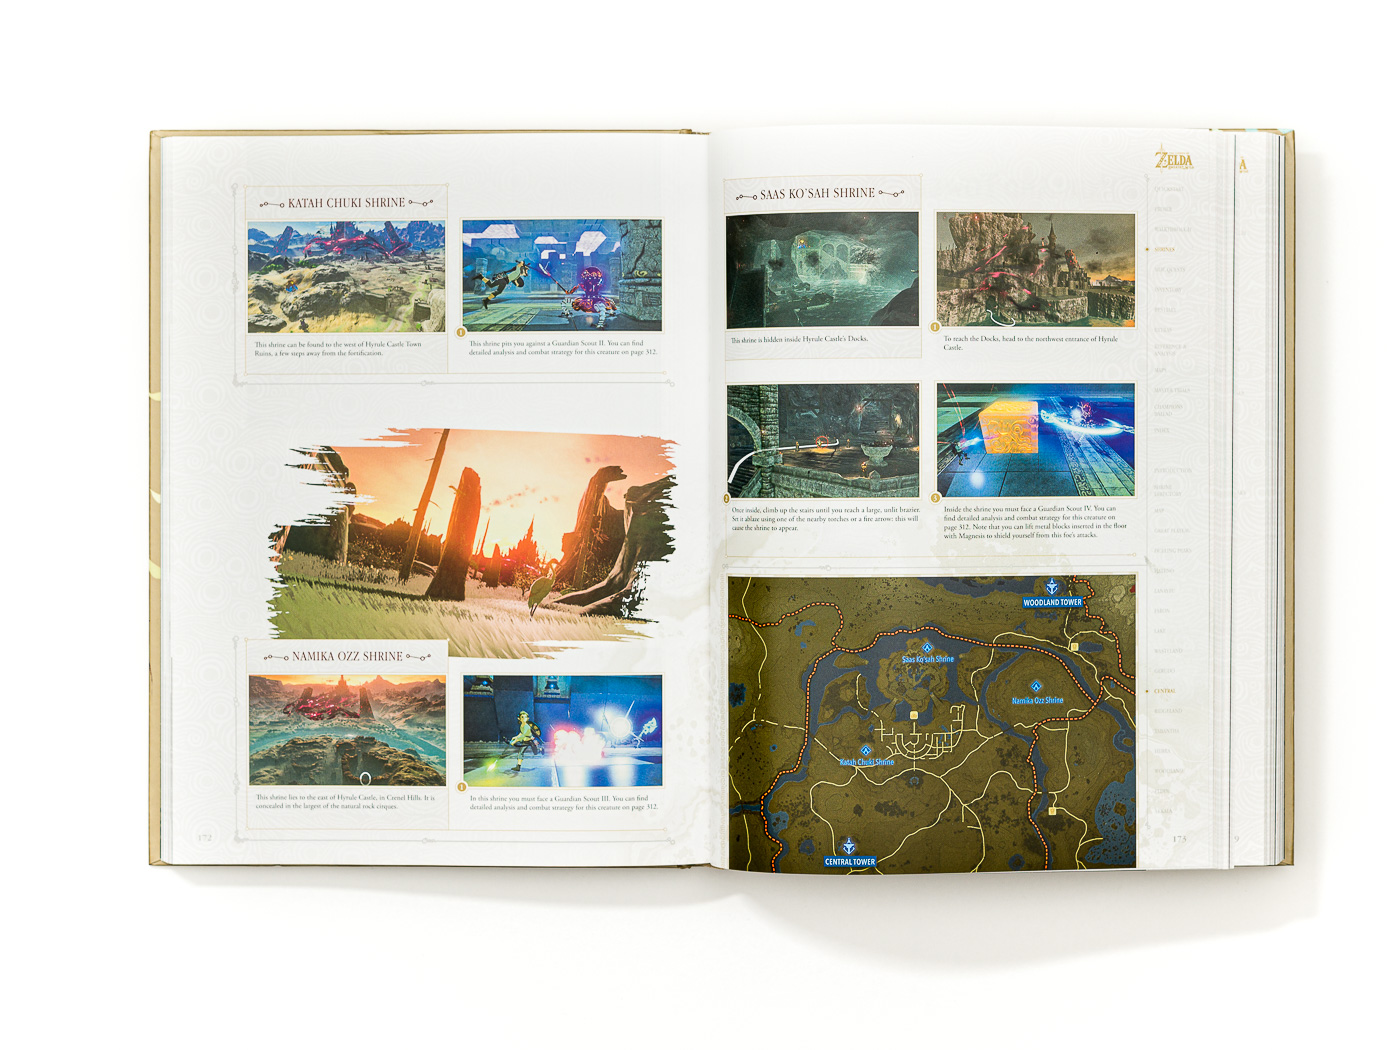 Breath of the Wild Guide Available for Free Online